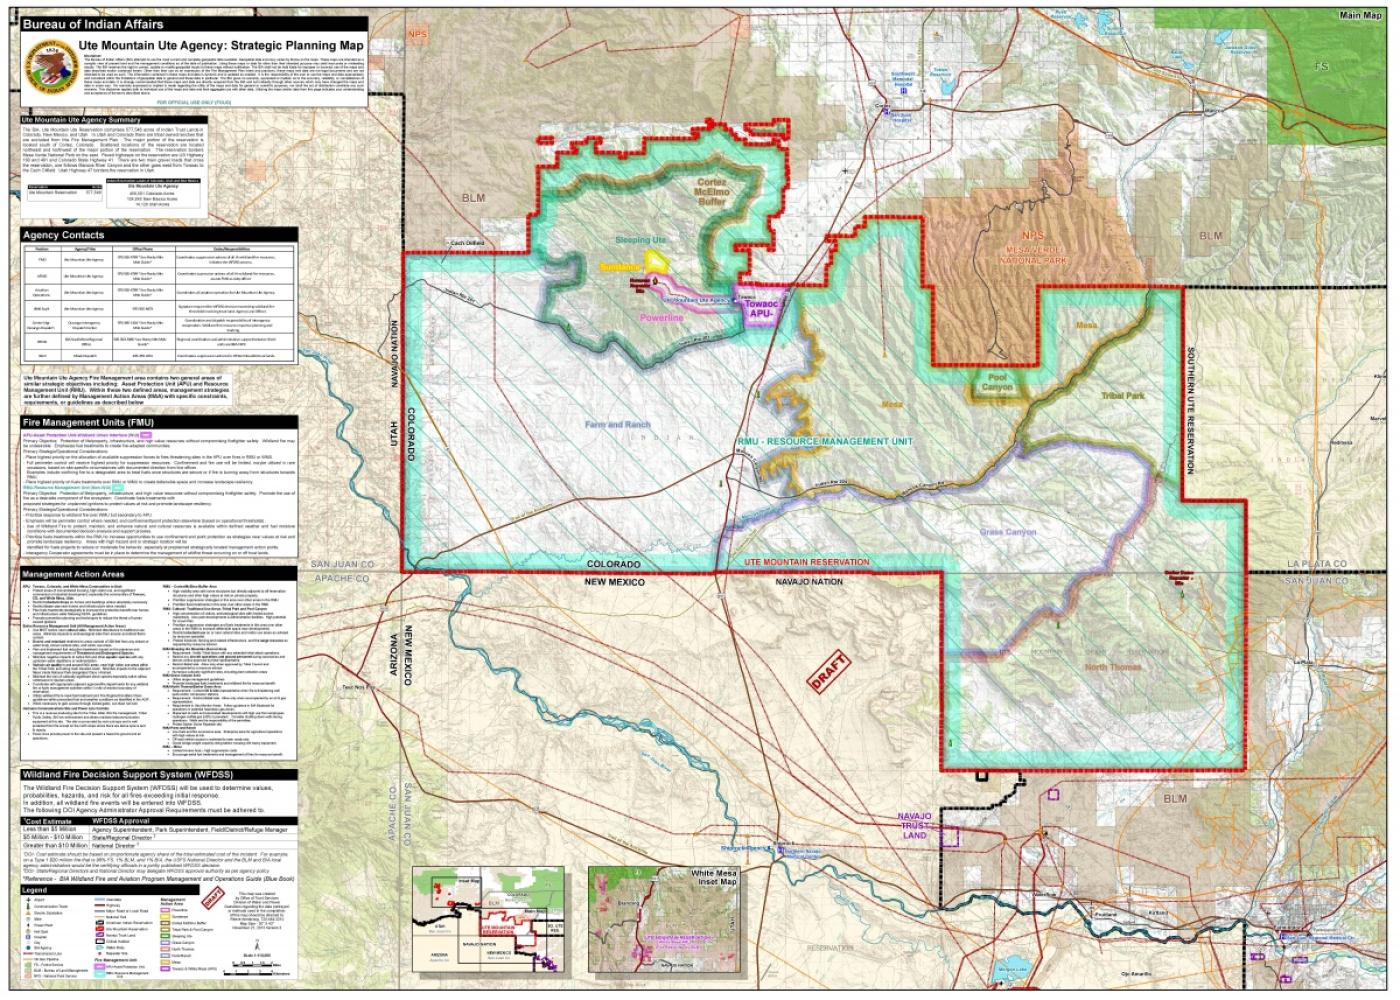 An example of a spatial wildland fire management plan: Ute Mountain Agency's mapsheet